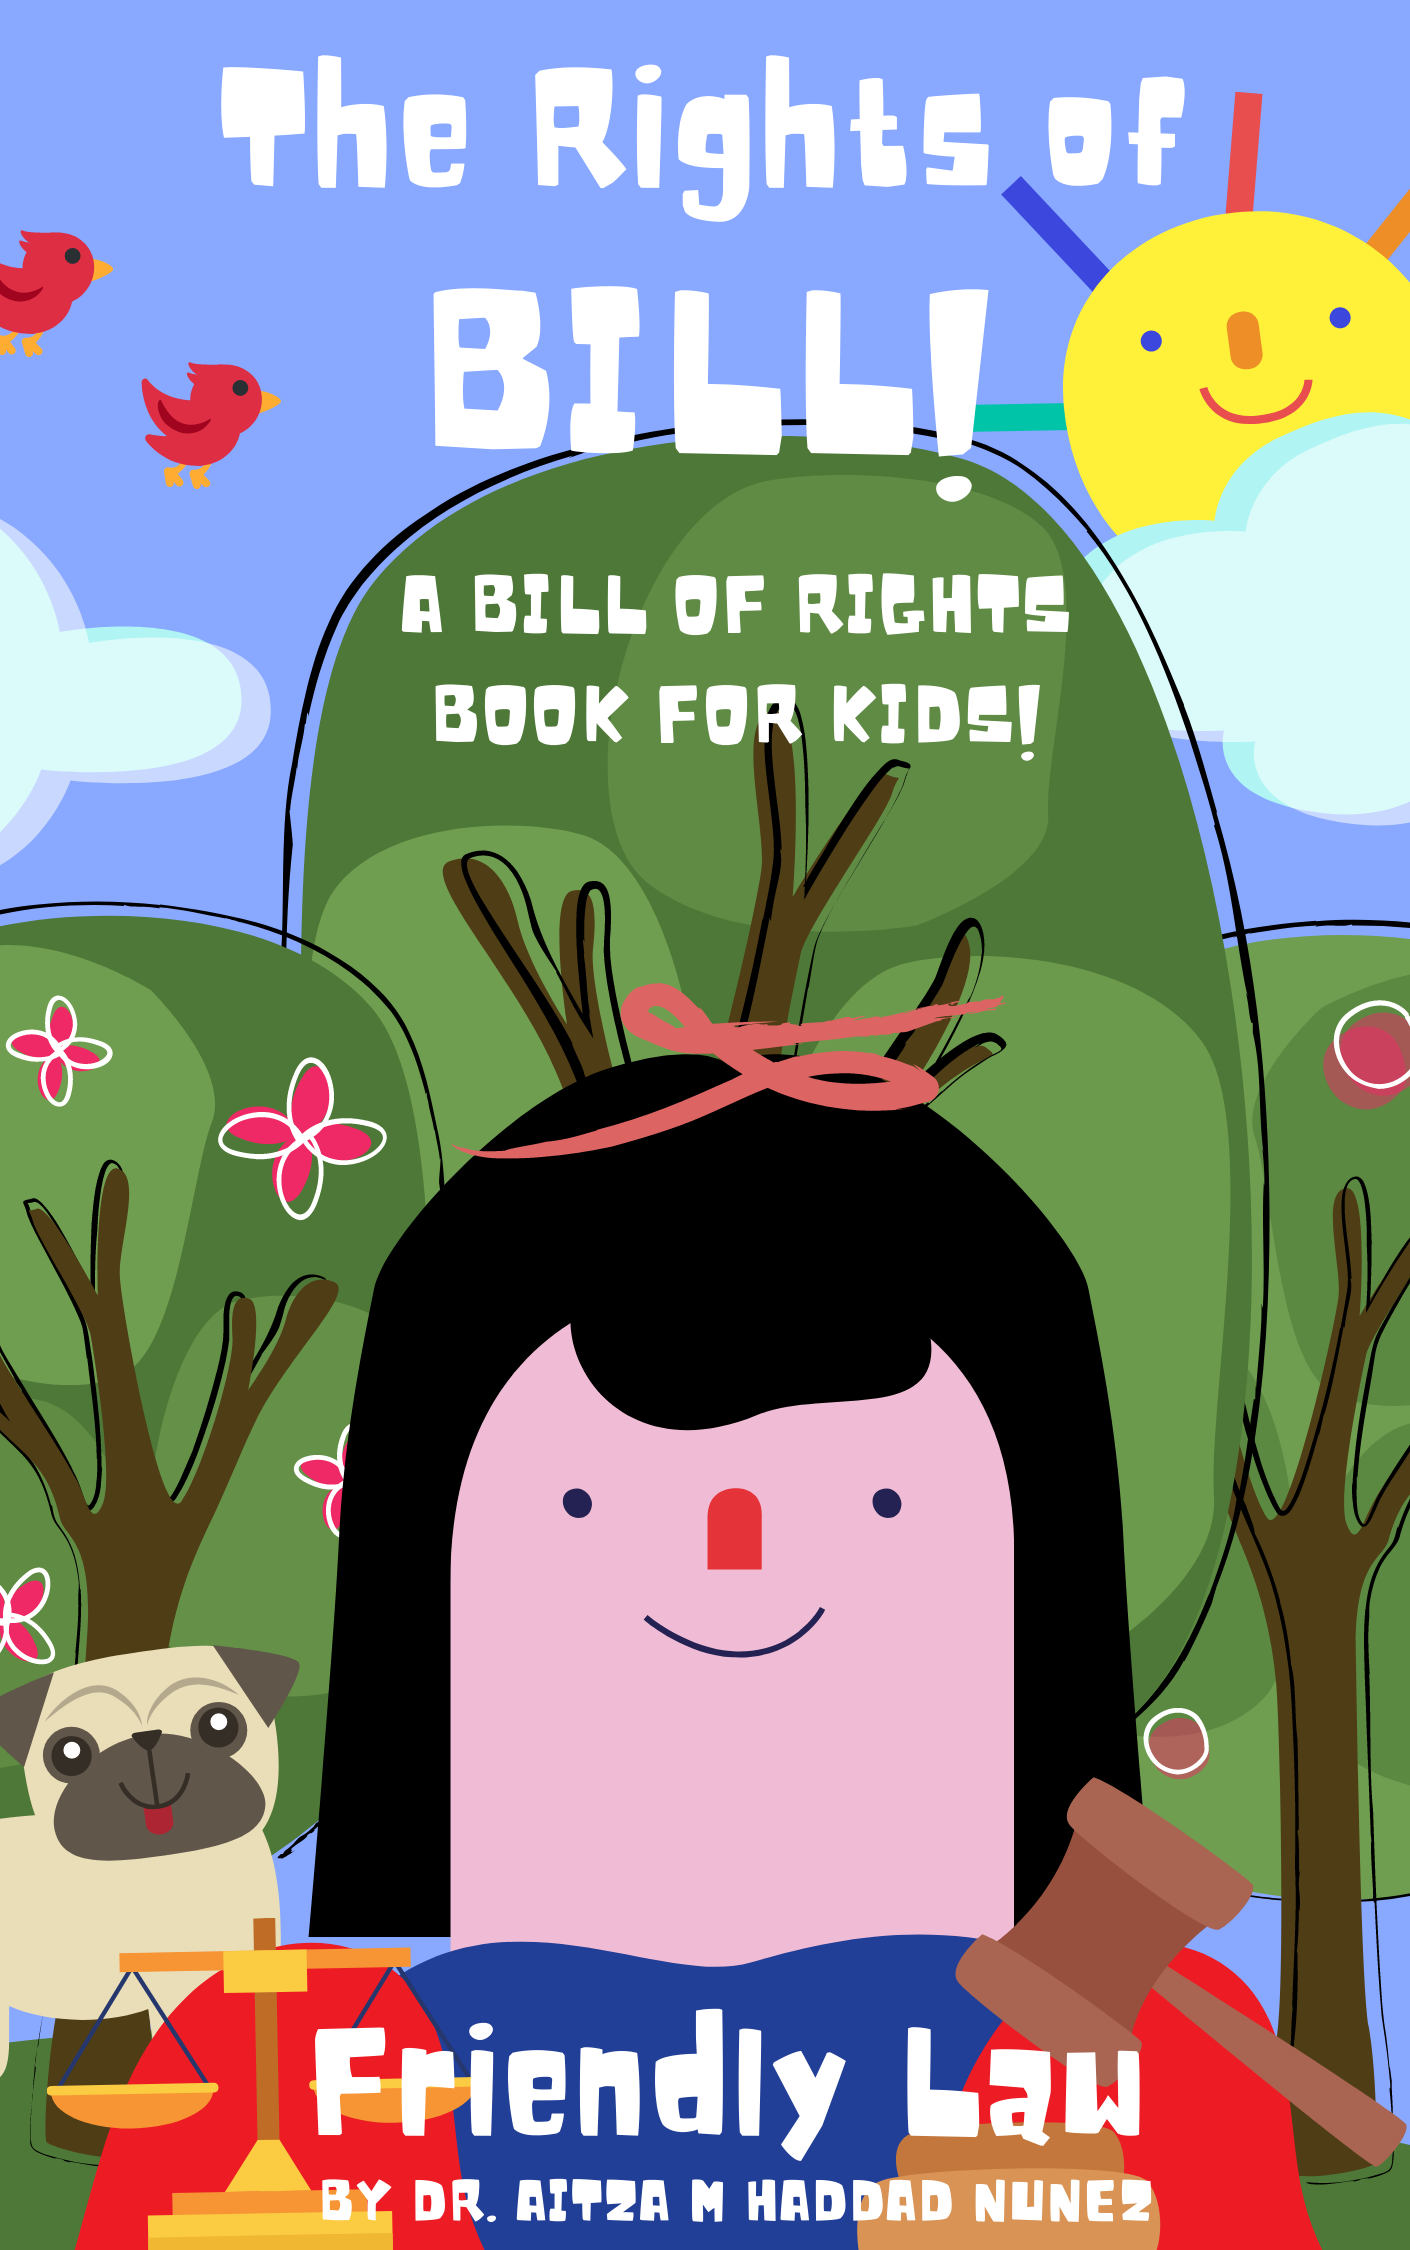 bill of rights for kids